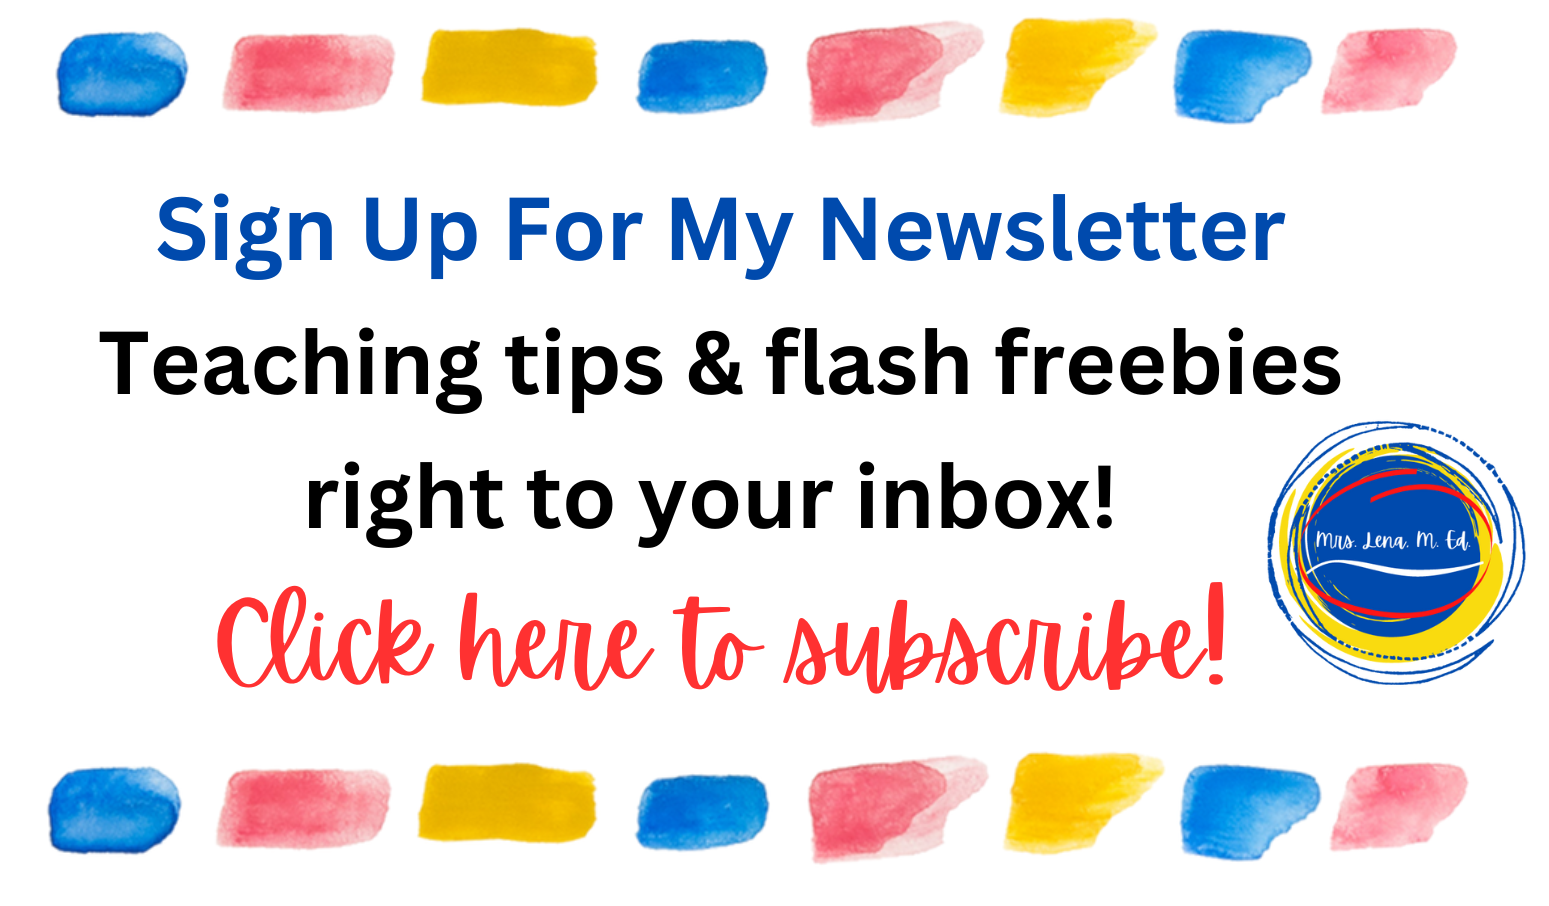 Mrs Lena KidsRead Newsletter Sign Up Free Teaching Tips and Flash Freebies